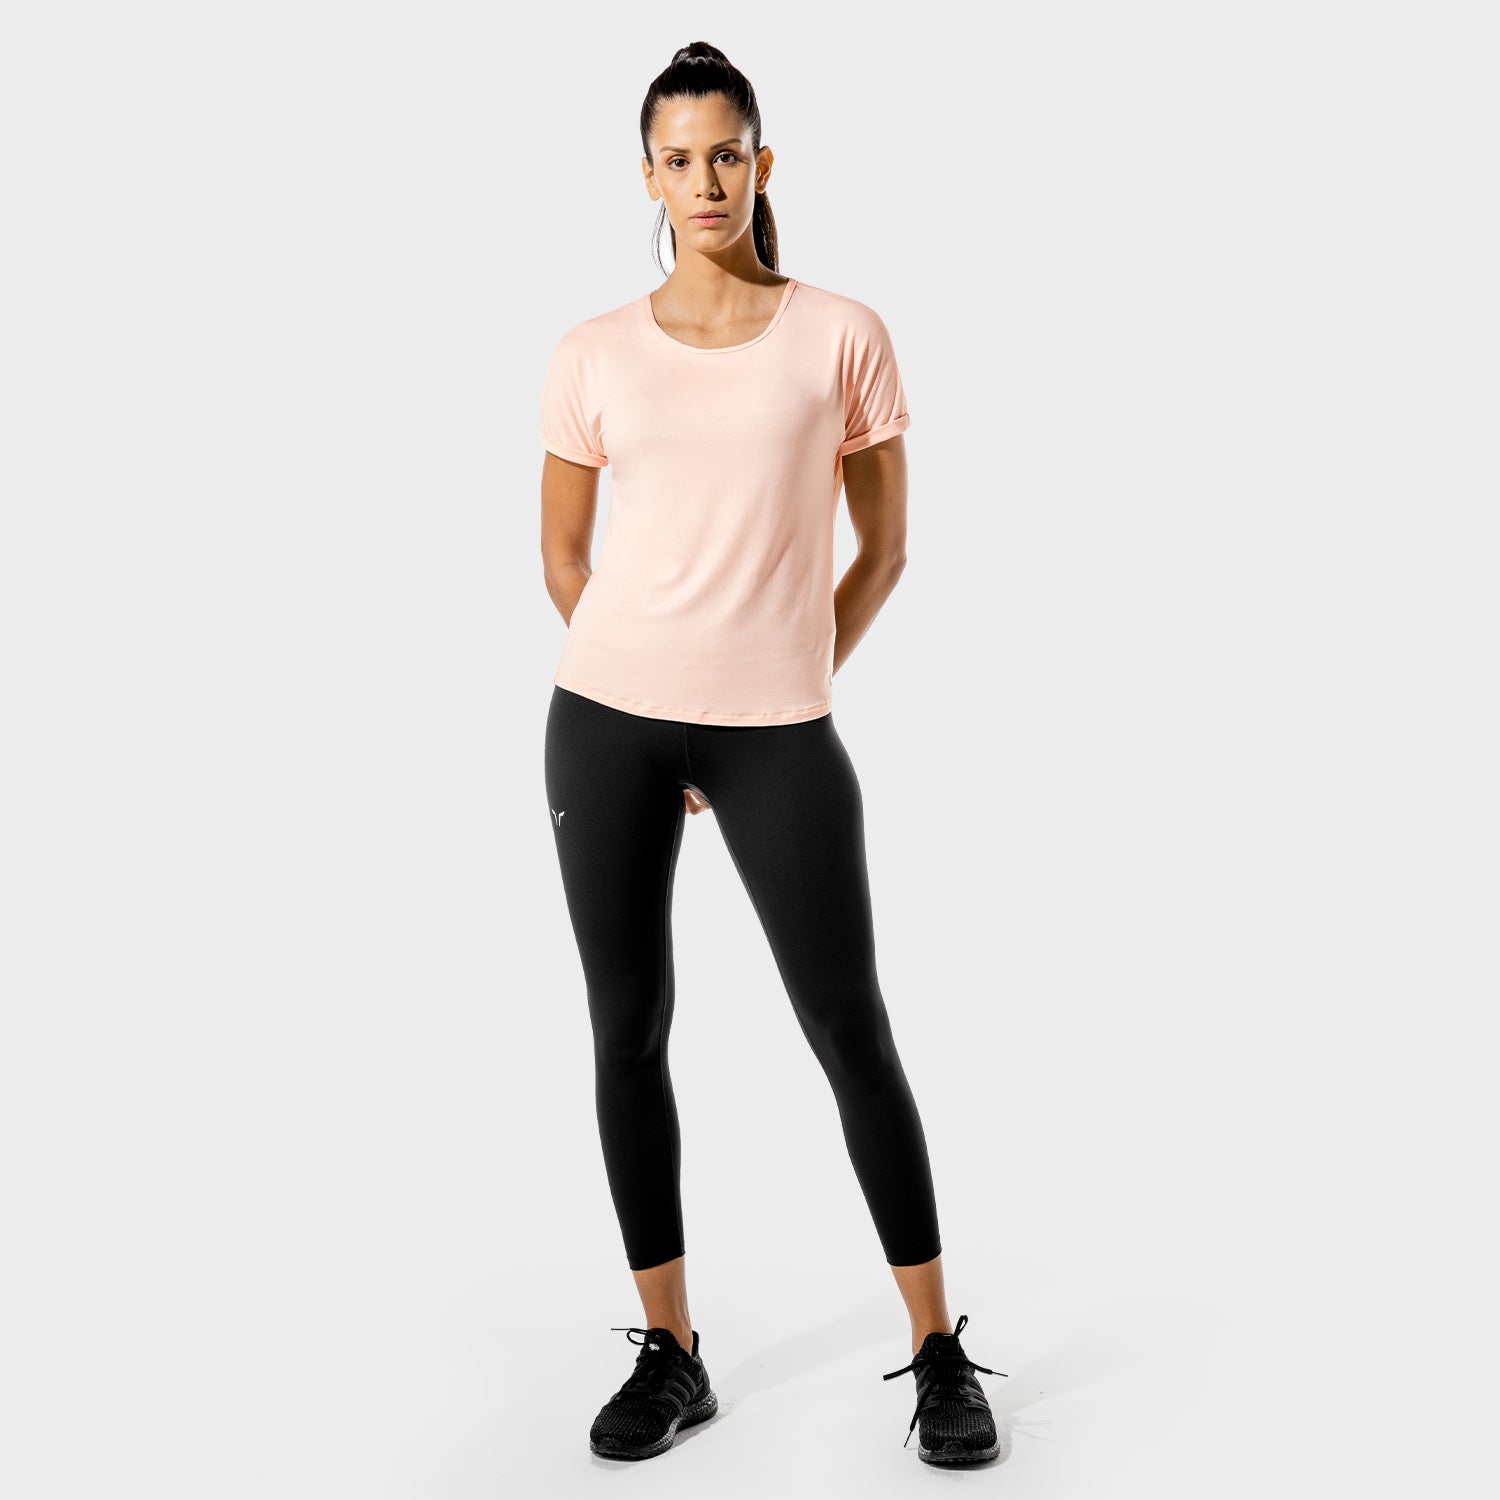 squatwolf-gym-wear-womens-fitness-oversized-tee-pink-workout-shirts